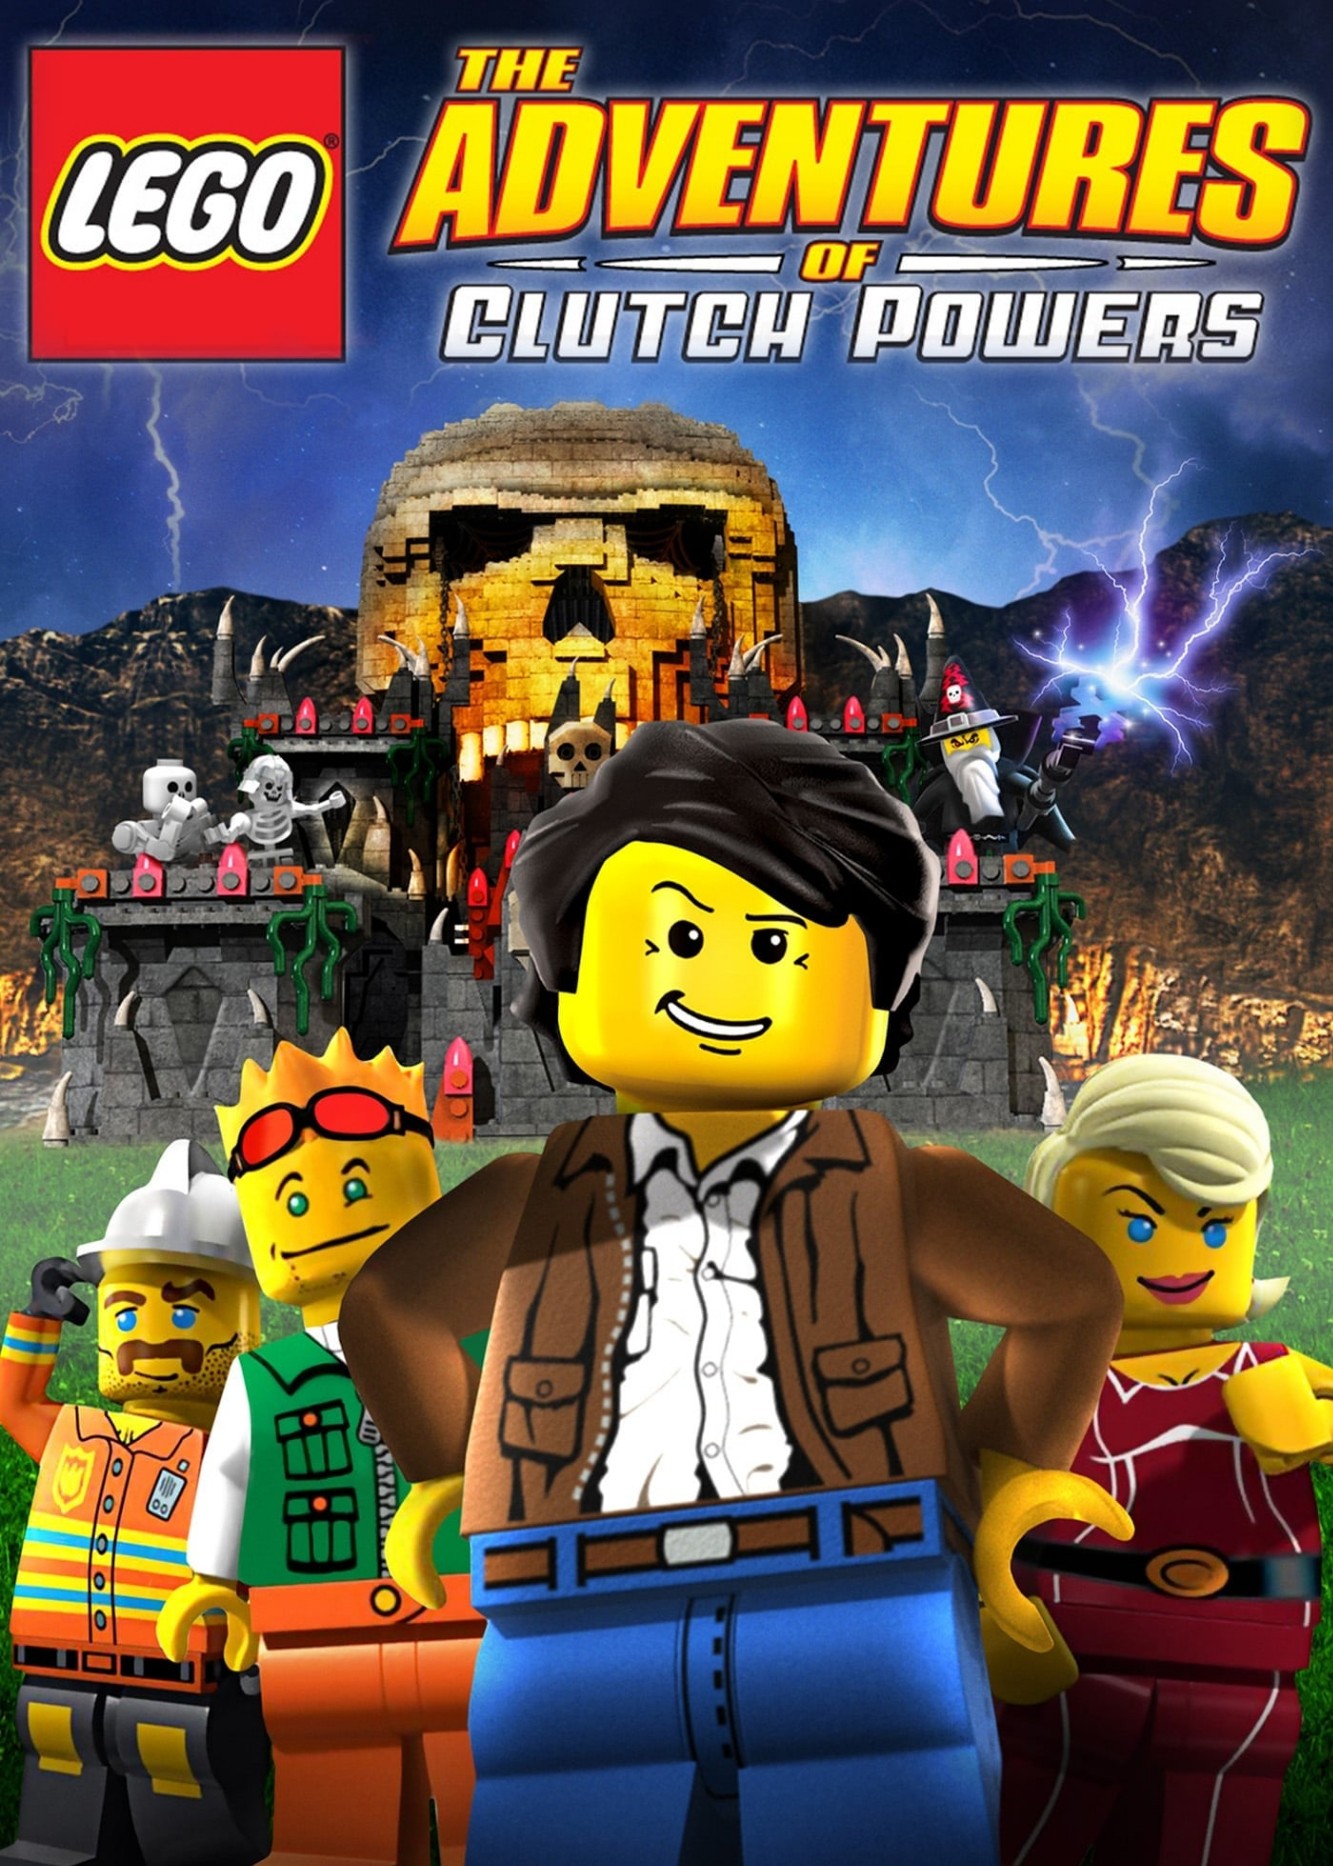 Lego: The Adventures of Clutch Powers (Lego: The Adventures of Clutch Powers) [2010]